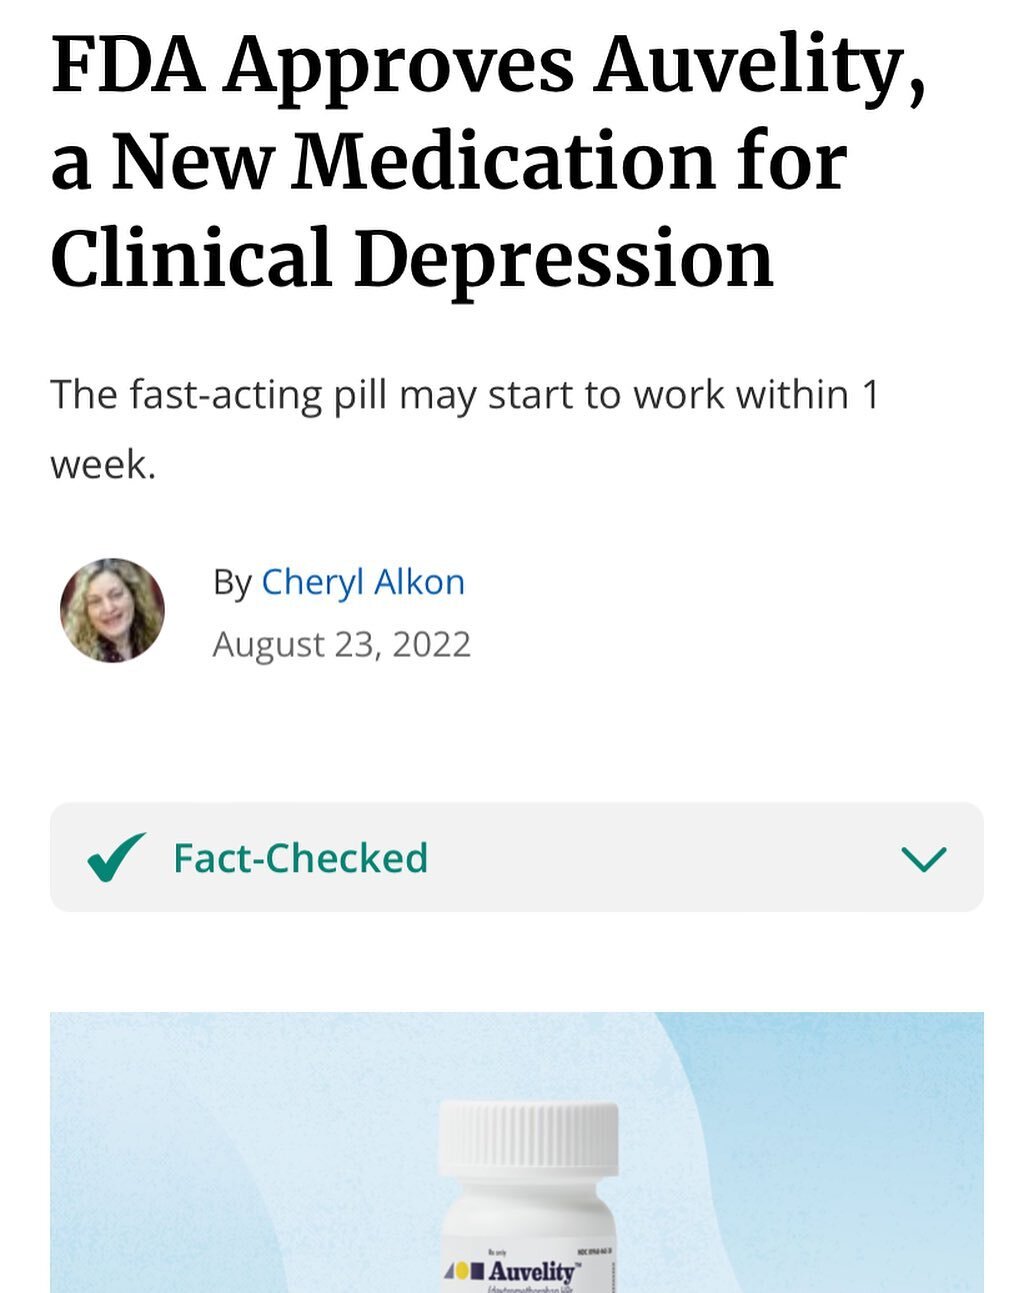 EXCERPT:
&ldquo;The U.S. Food and Drug Administration on August 19 approved dextromethorphan-bupropion, or Auvelity, a drug used to treat major depressive disorder, also known as clinical depression, in adults.

It is the first drug to treat major de